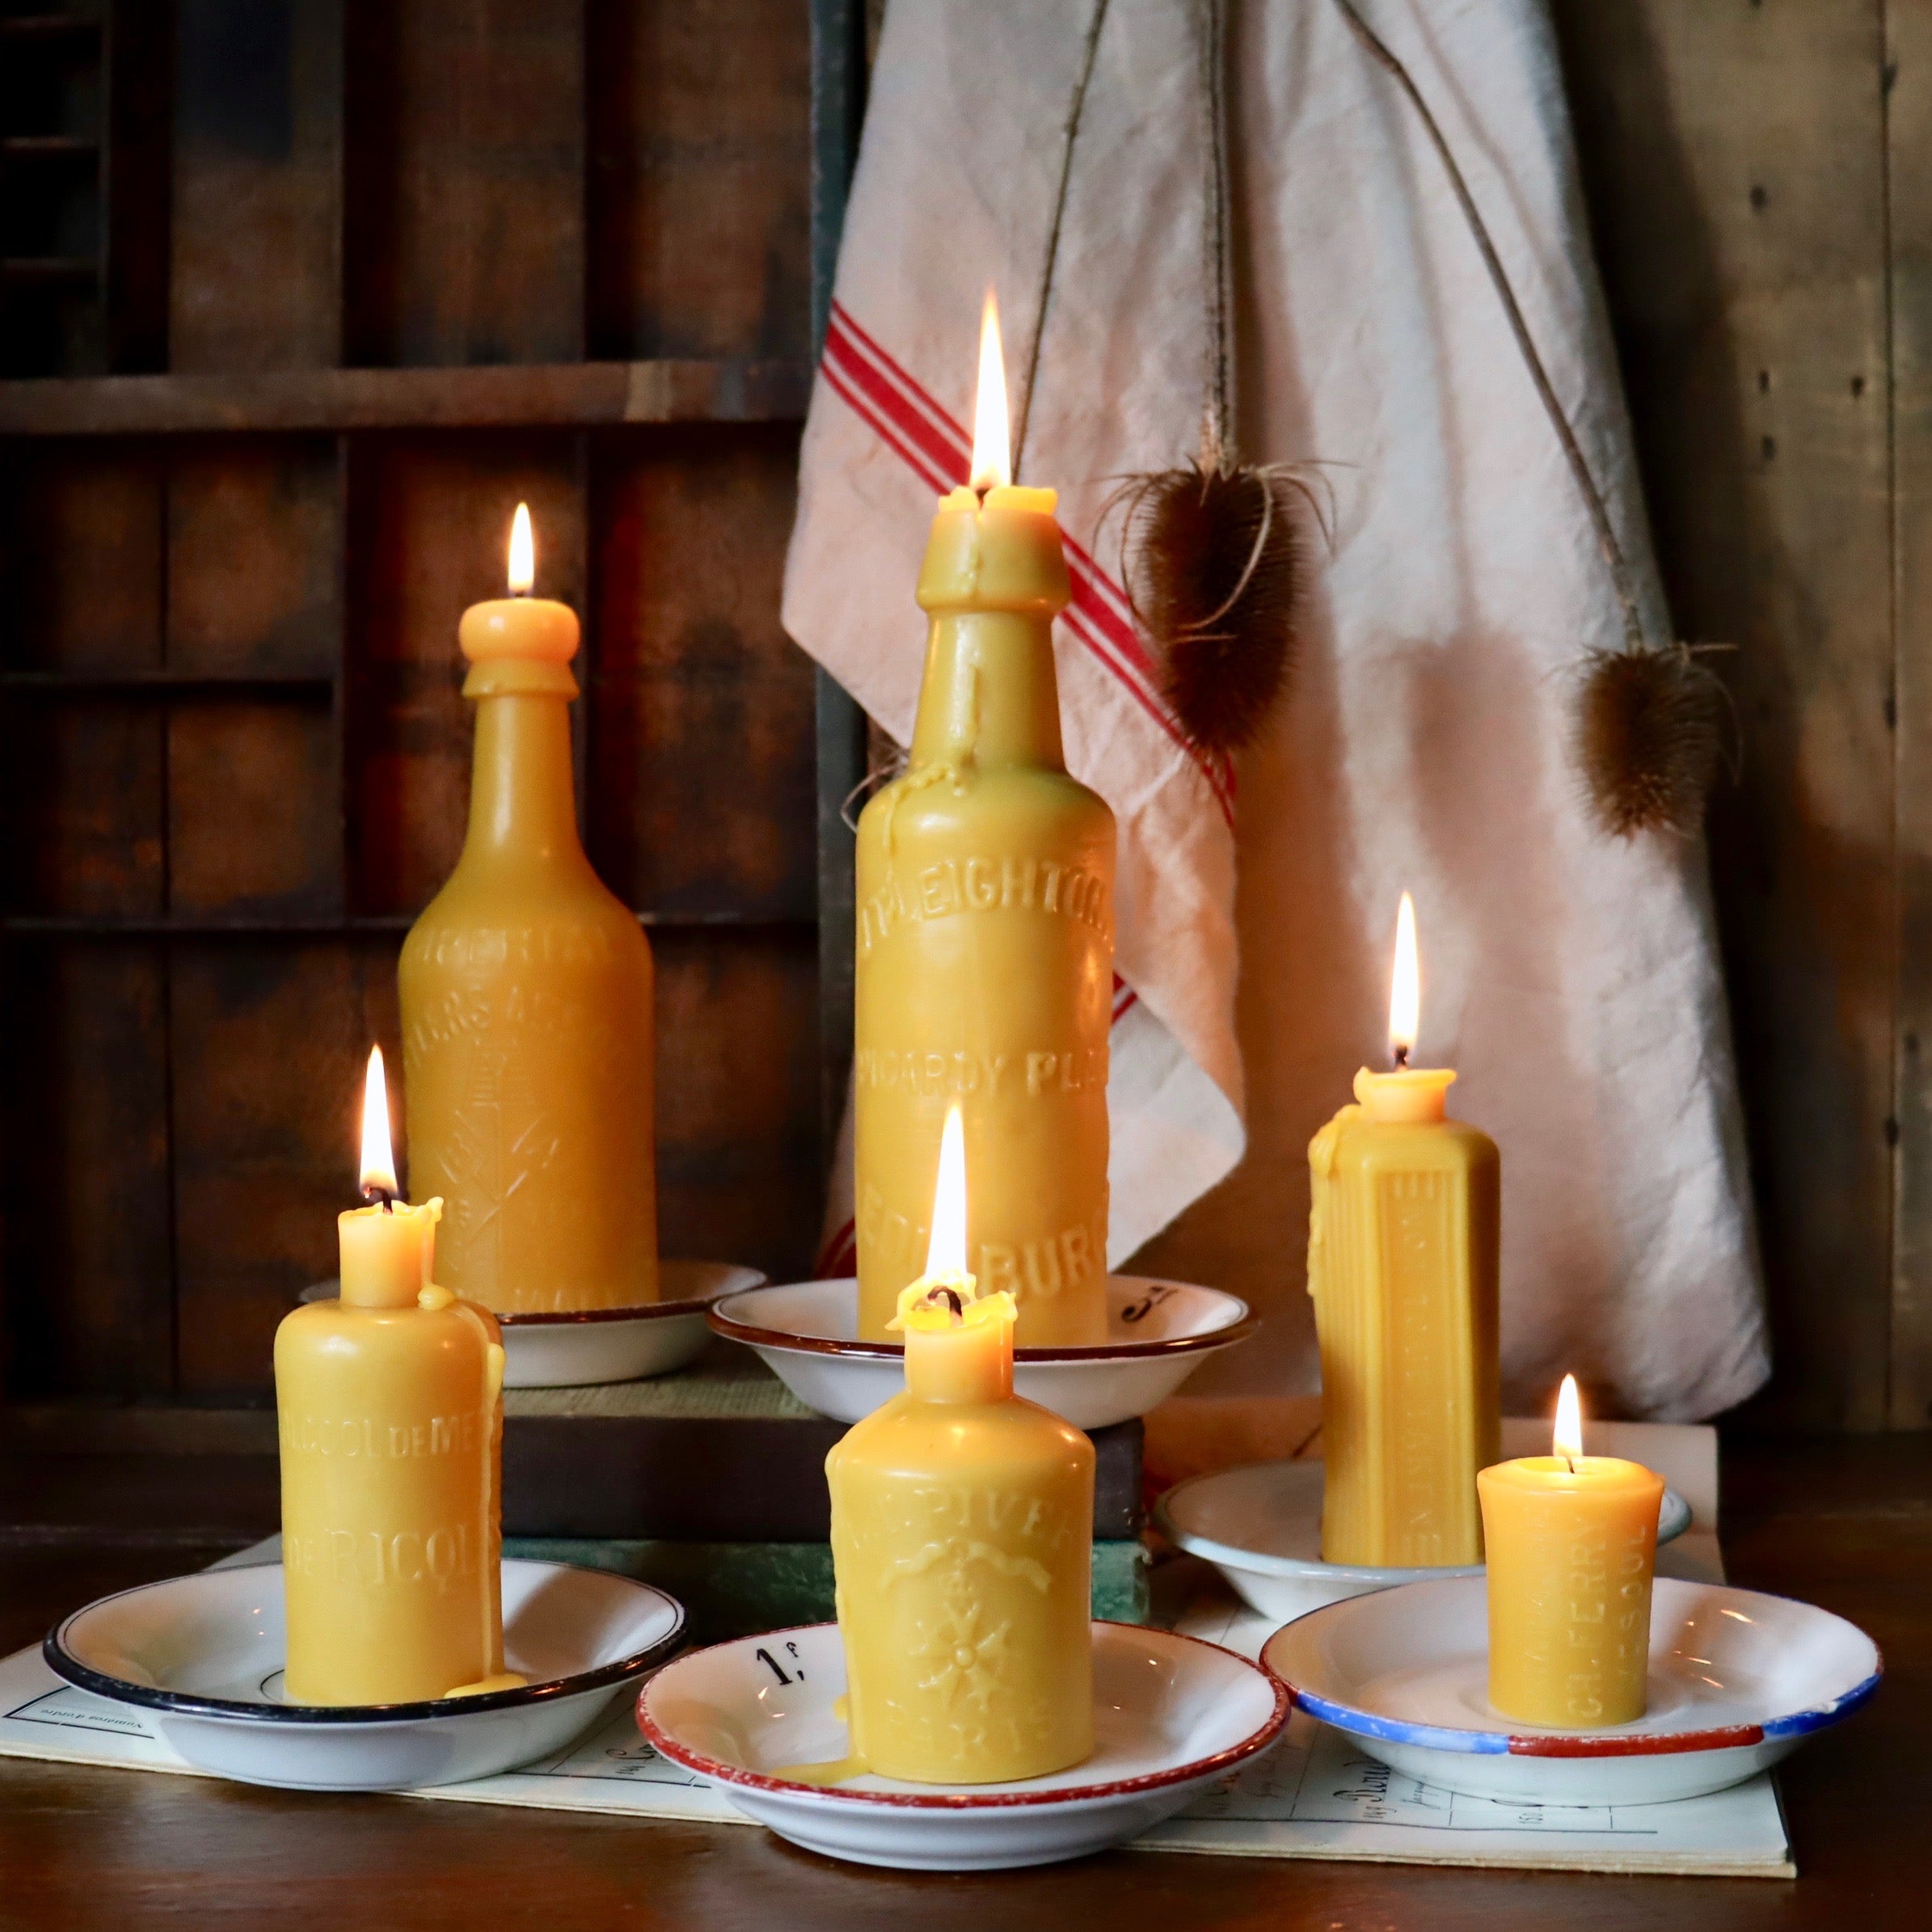 Askews Candles - Poison Bottle Beeswax Candle